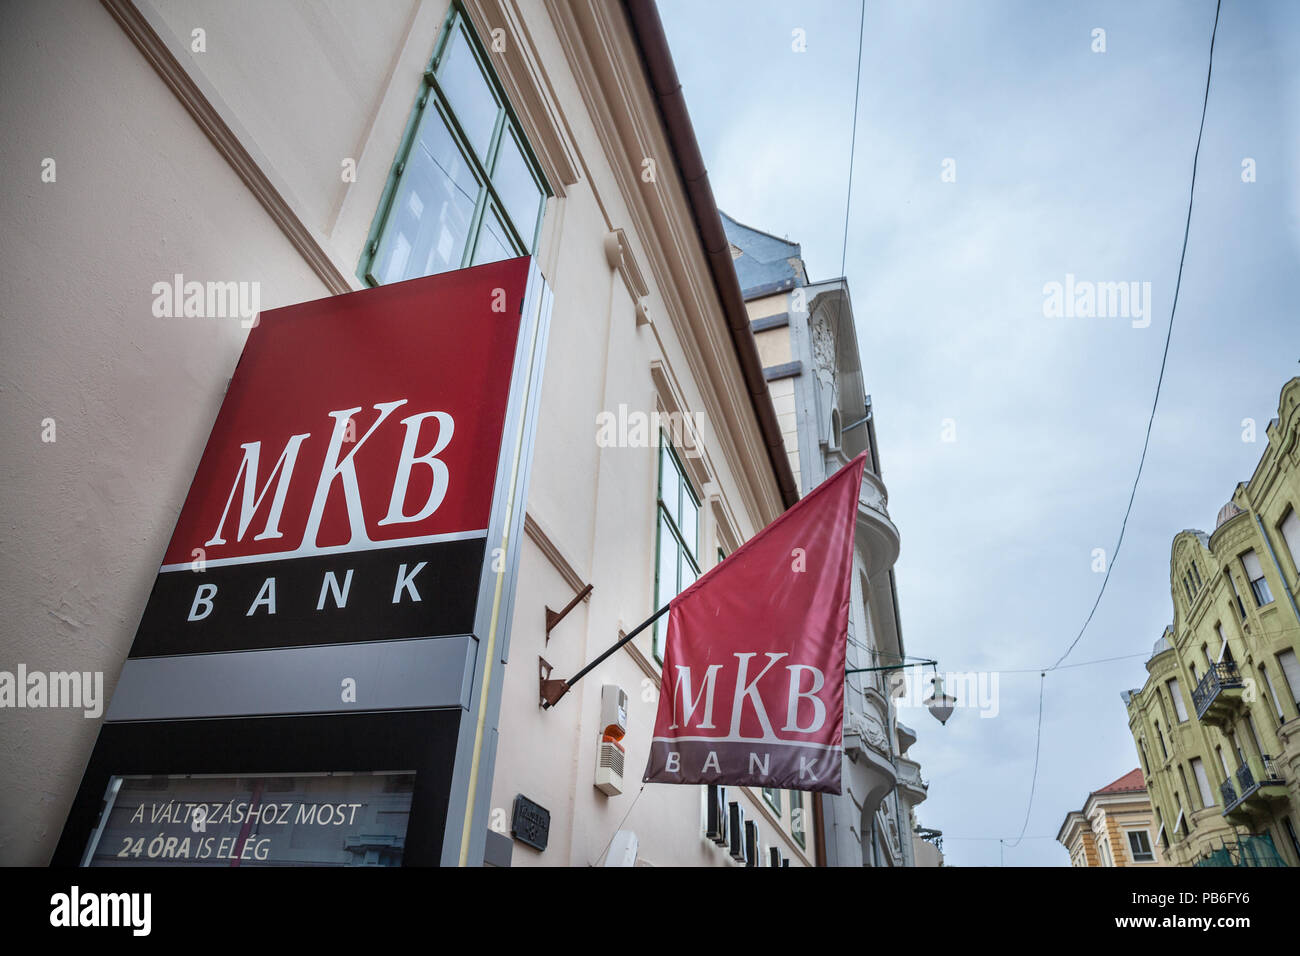 SZEGED, HUNGARY - JULY 4, 2018: MKB Bank logo on their main office for Szeged in the city center. MKB is one of the biggest domestics banks of Hungary Stock Photo